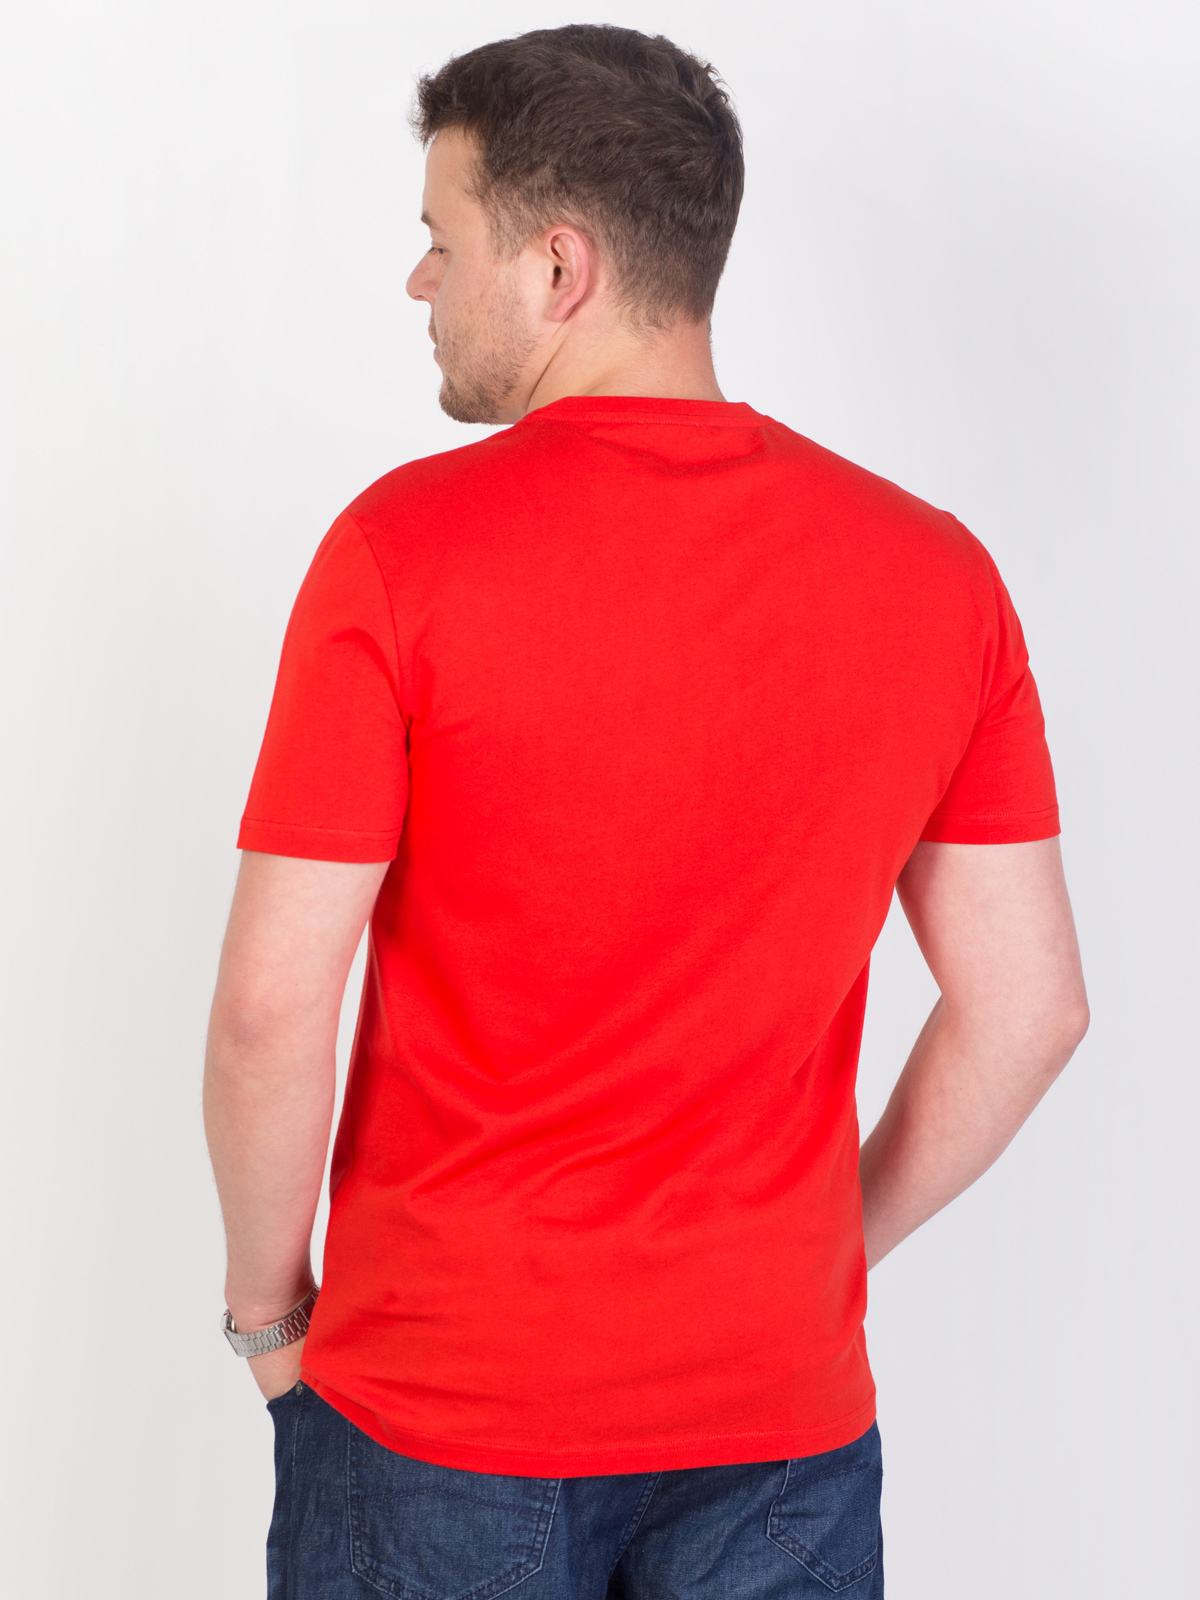 Red tshirt with blue print - 96438 € 16.31 img4